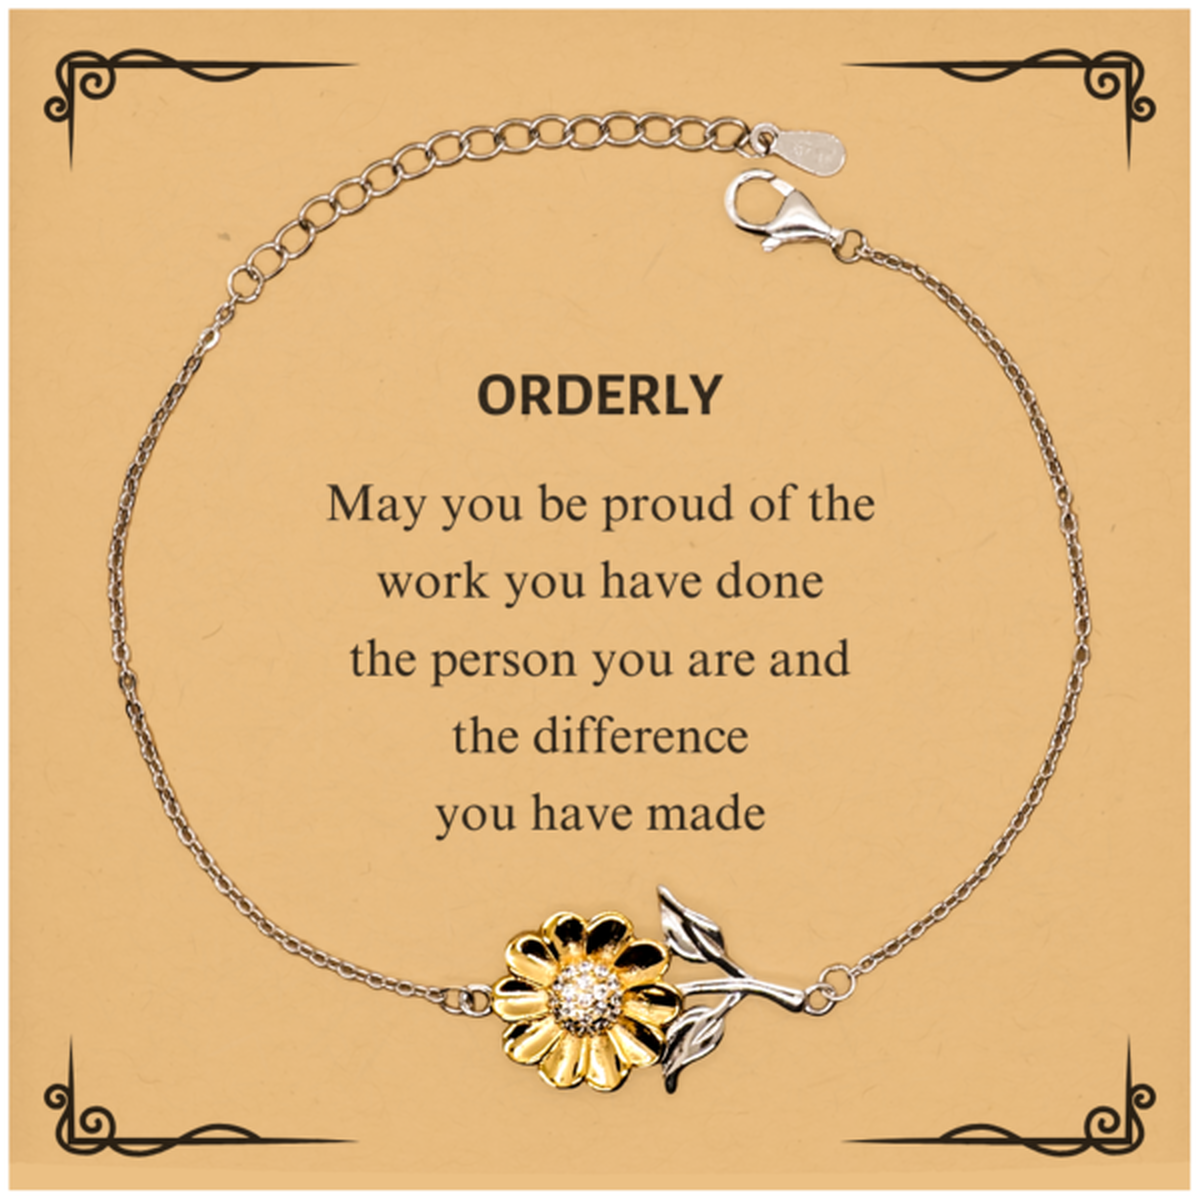 Orderly May you be proud of the work you have done, Retirement Orderly Sunflower Bracelet for Colleague Appreciation Gifts Amazing for Orderly